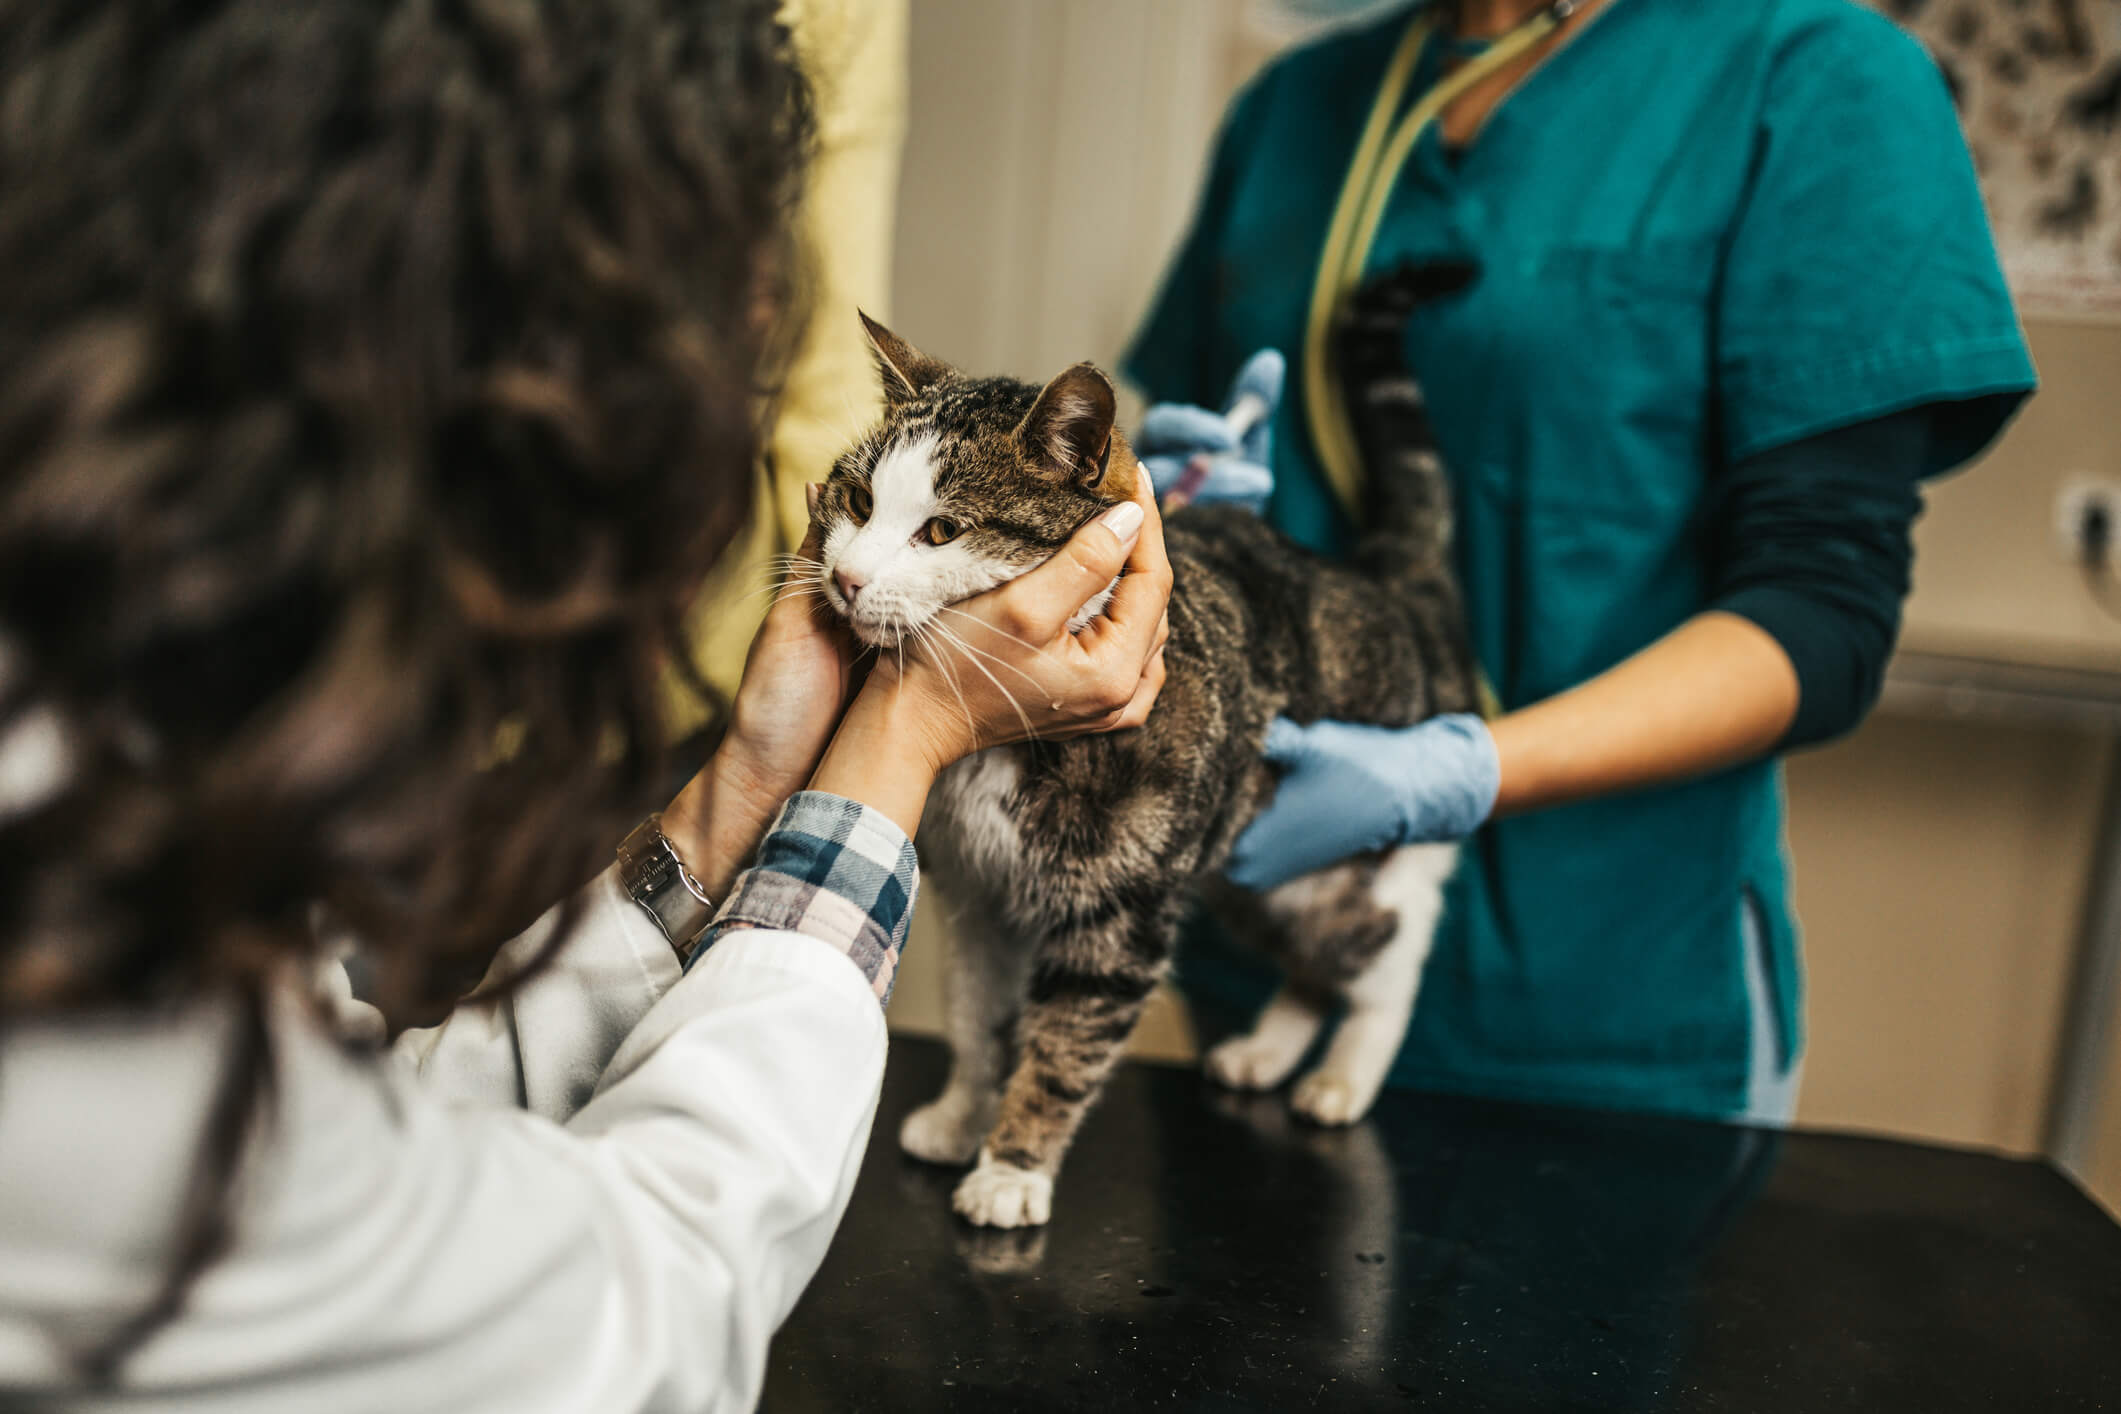 Veterinarian checking on cat in clinic.